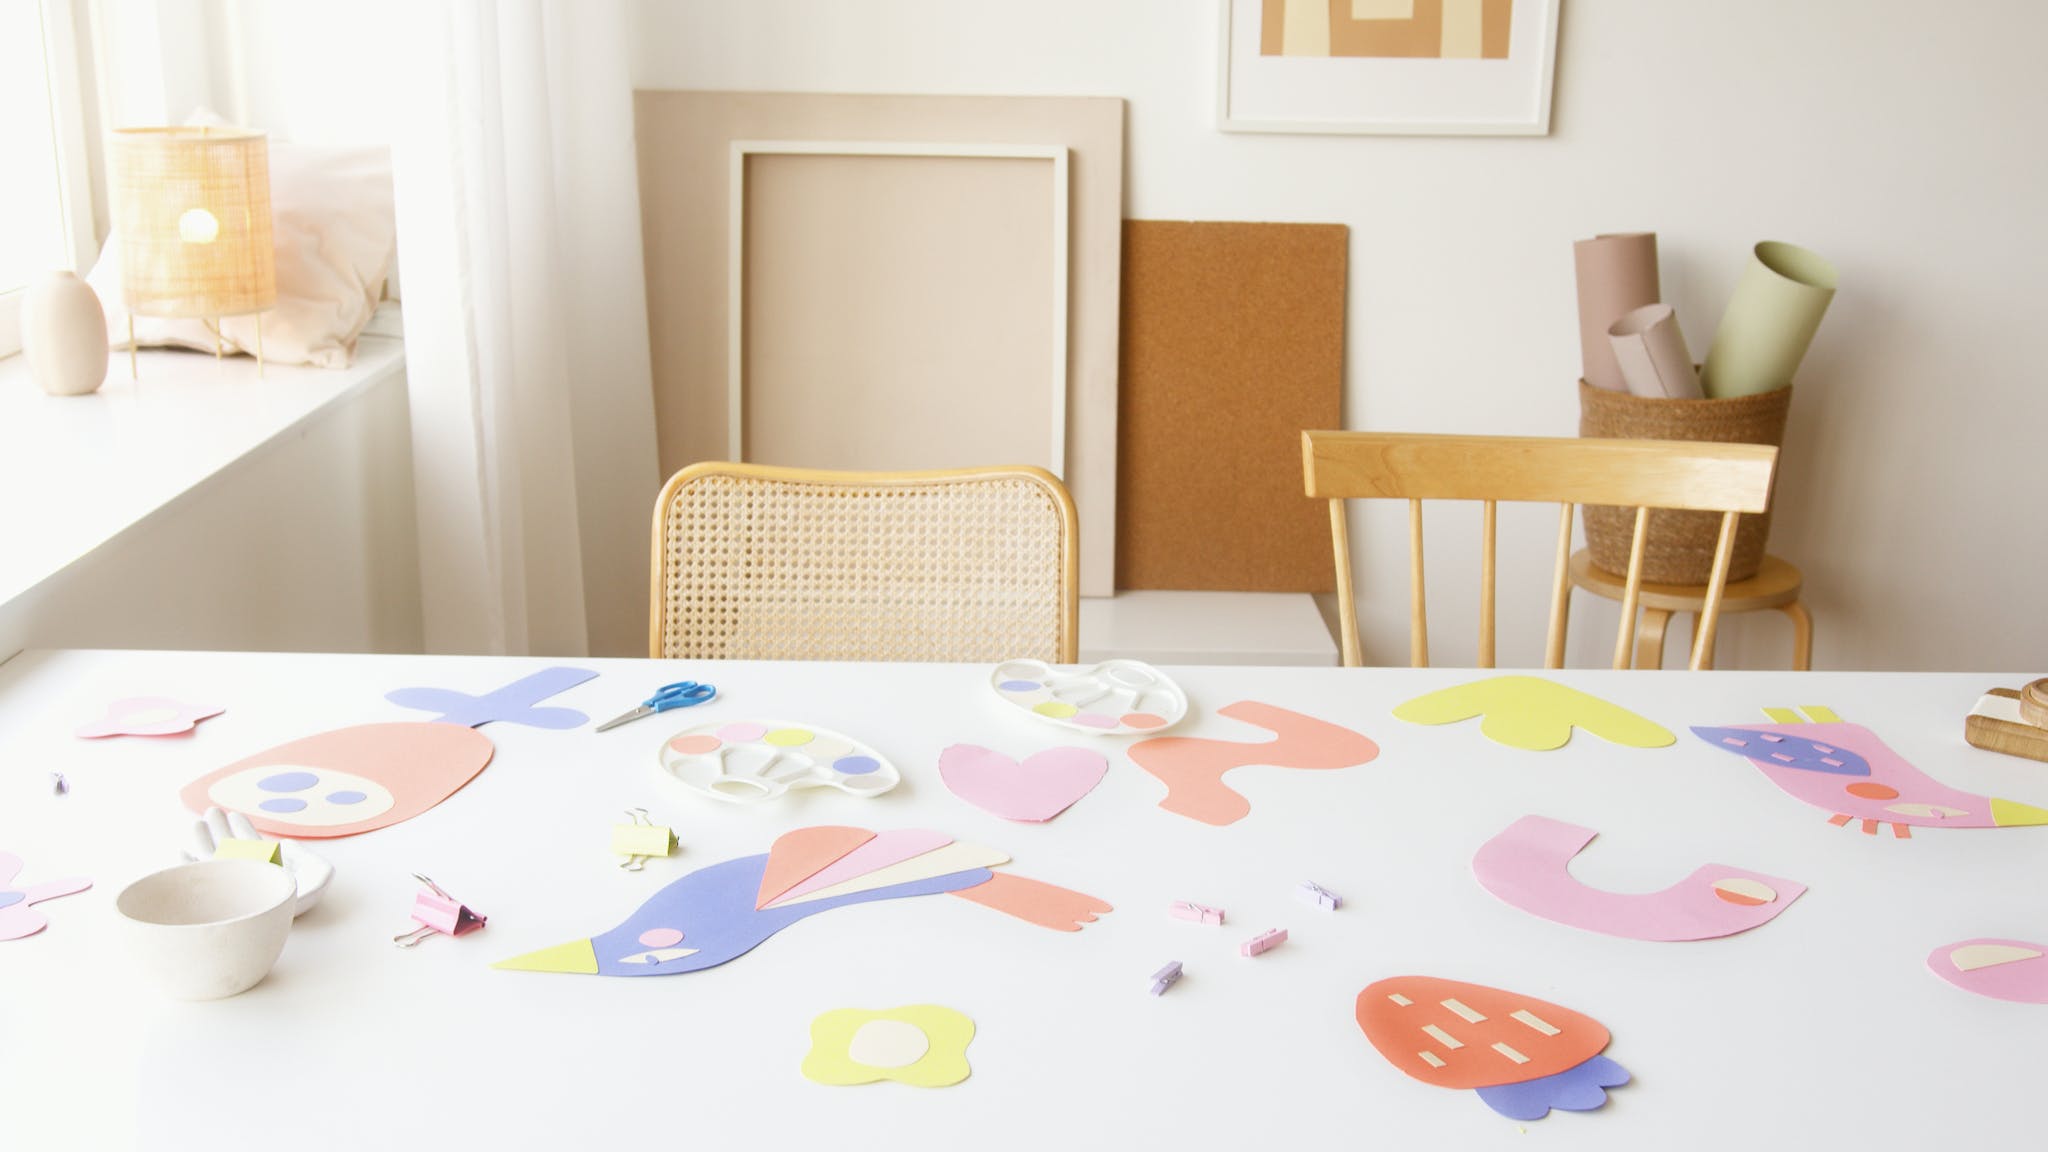 Creating an Art Area for Children (Affordably): What Worked for Us